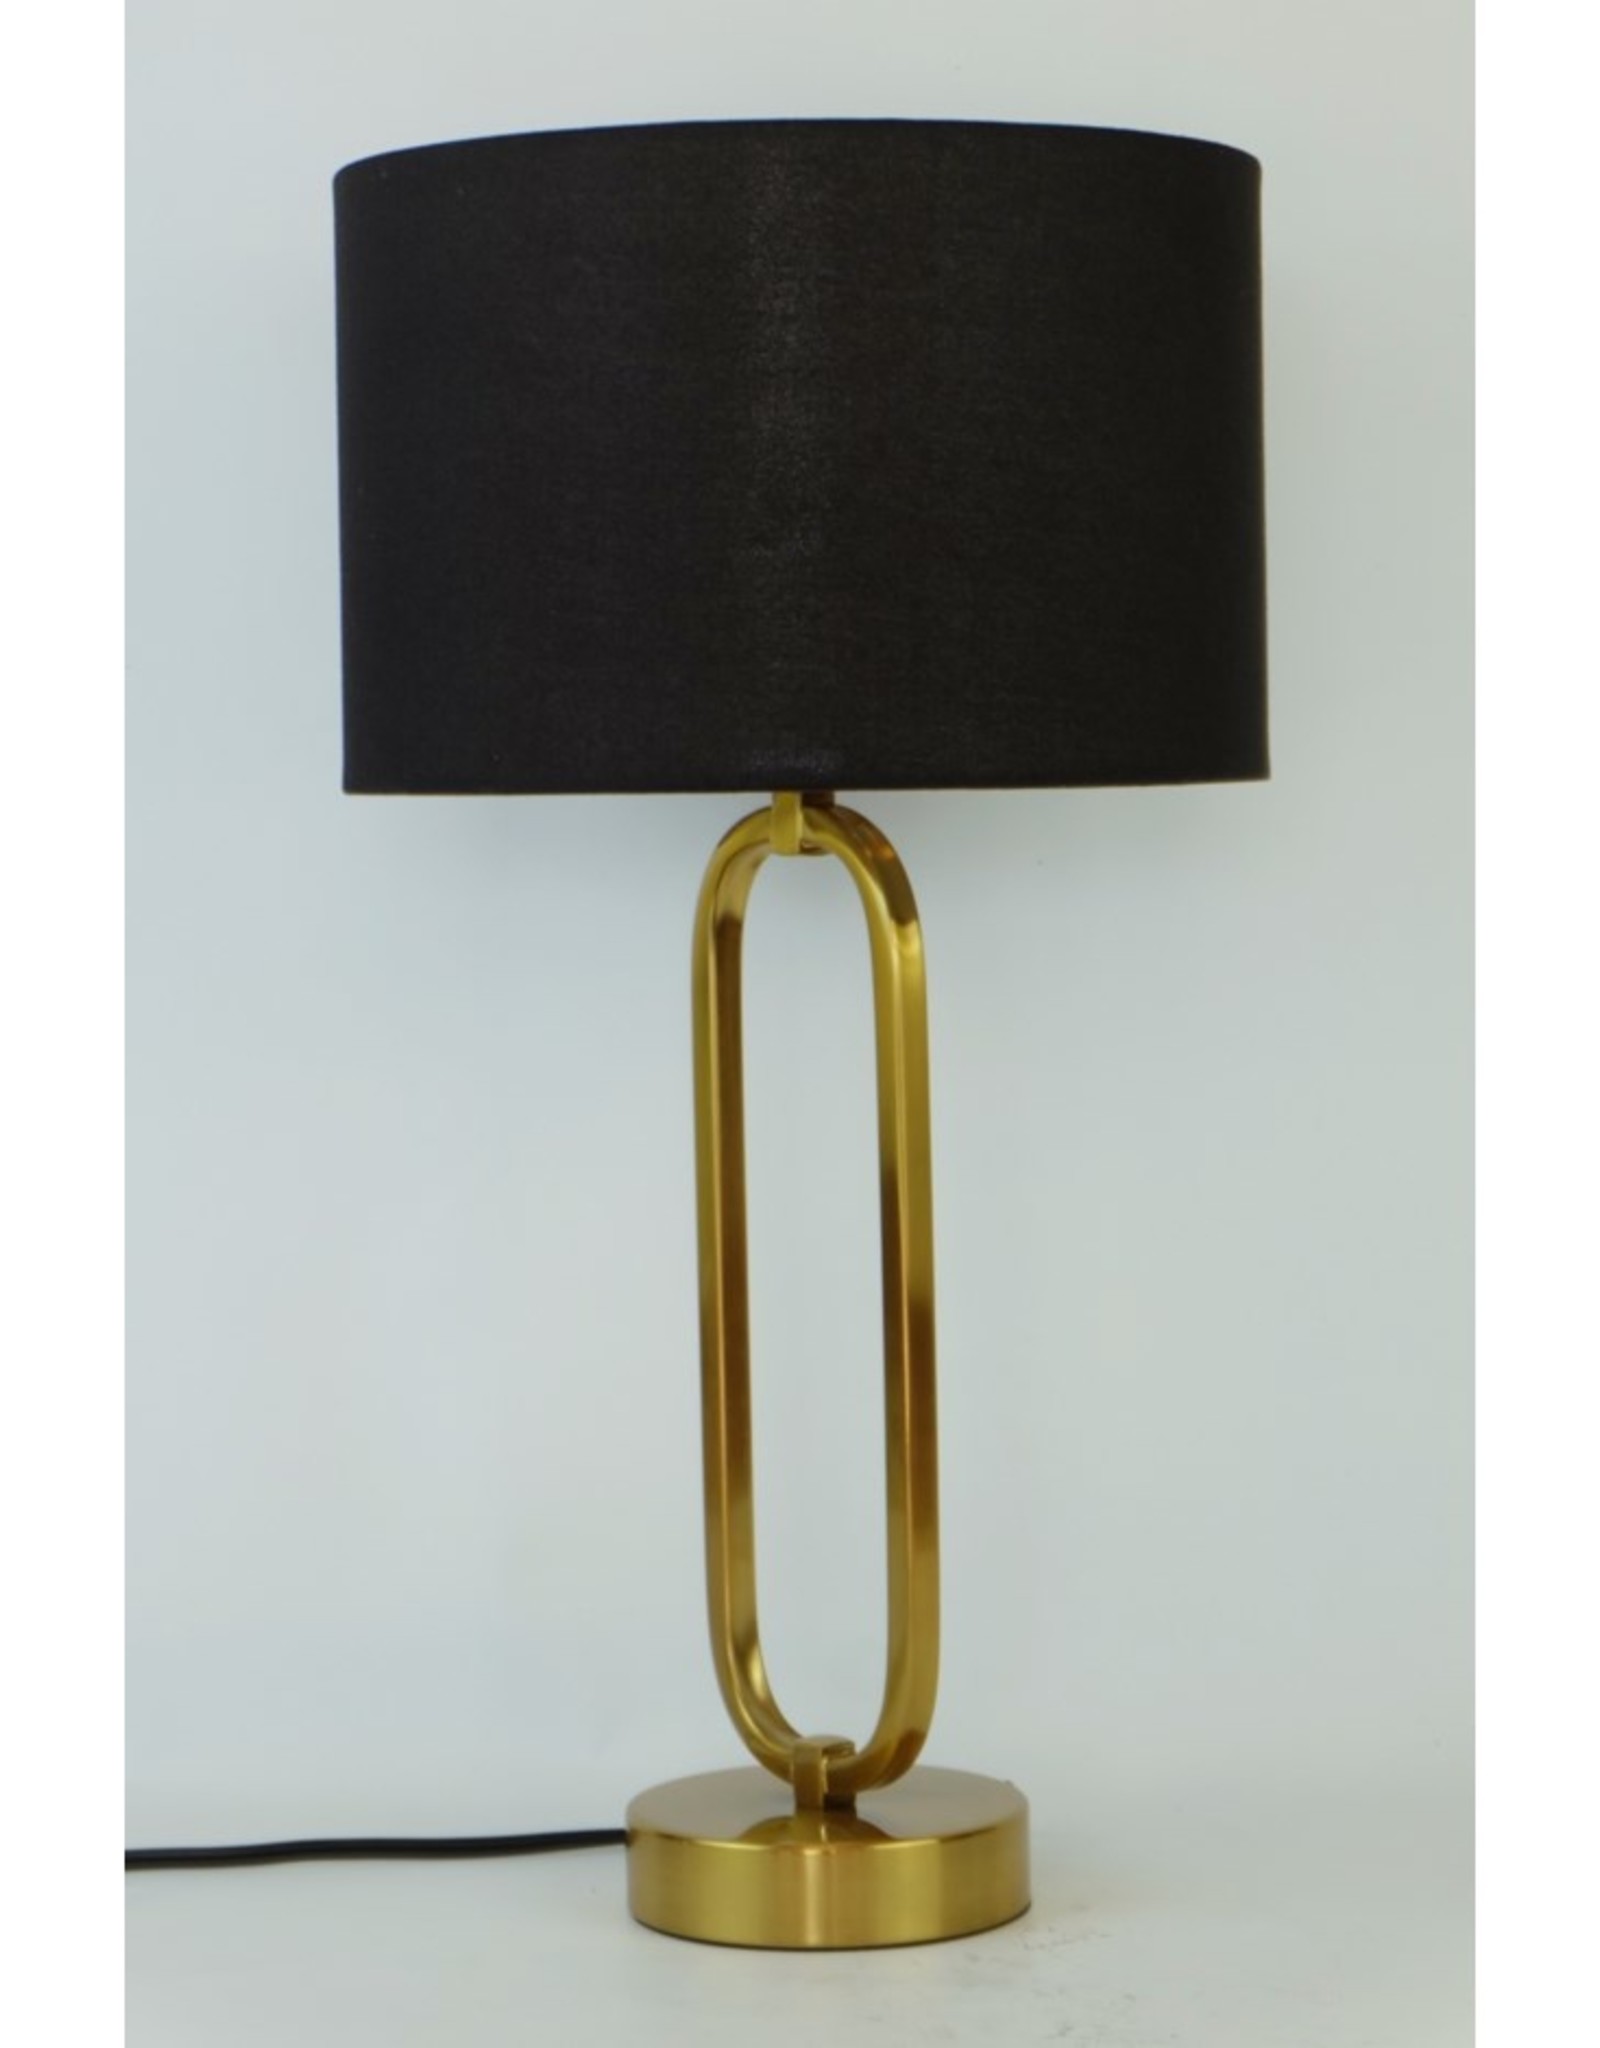 Lamp CJ Oval Ring in Gold Metal Table L. with Black Shade 1767LM397600 -  Design Therapy Inc.